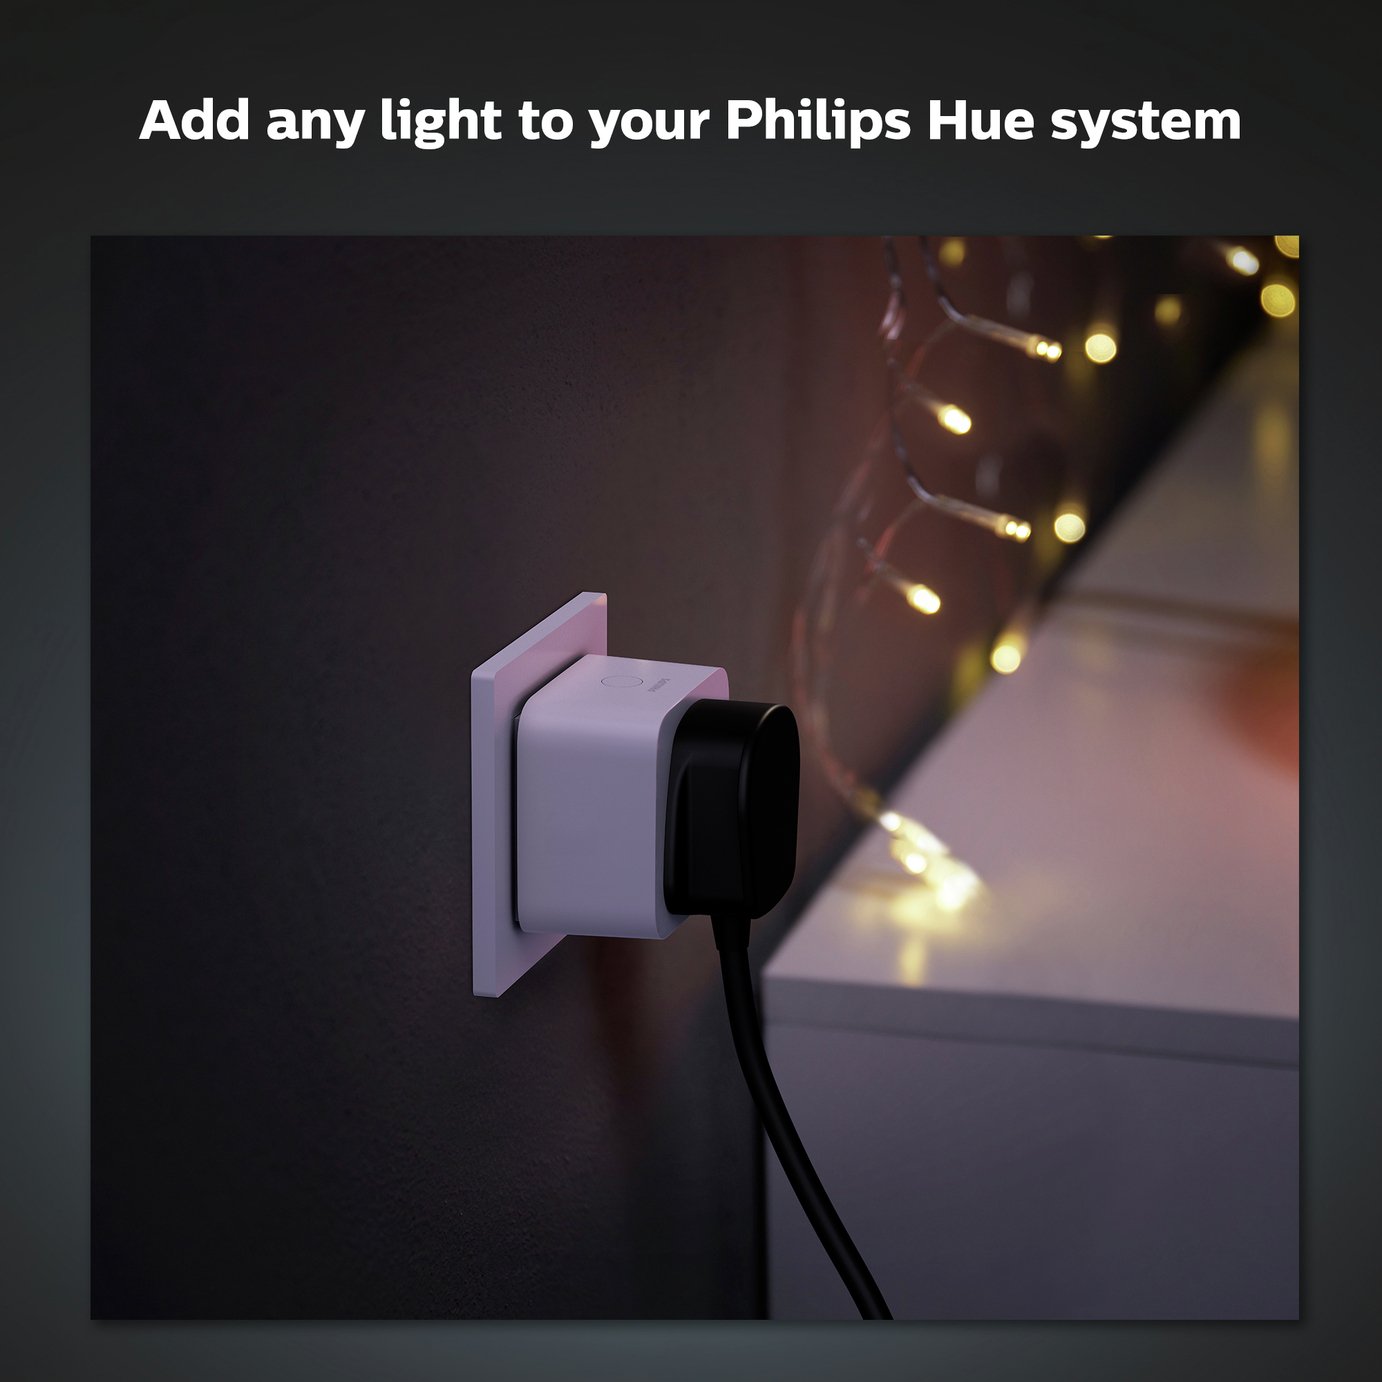 Philips Hue Smart Plug with Bluetooth Review